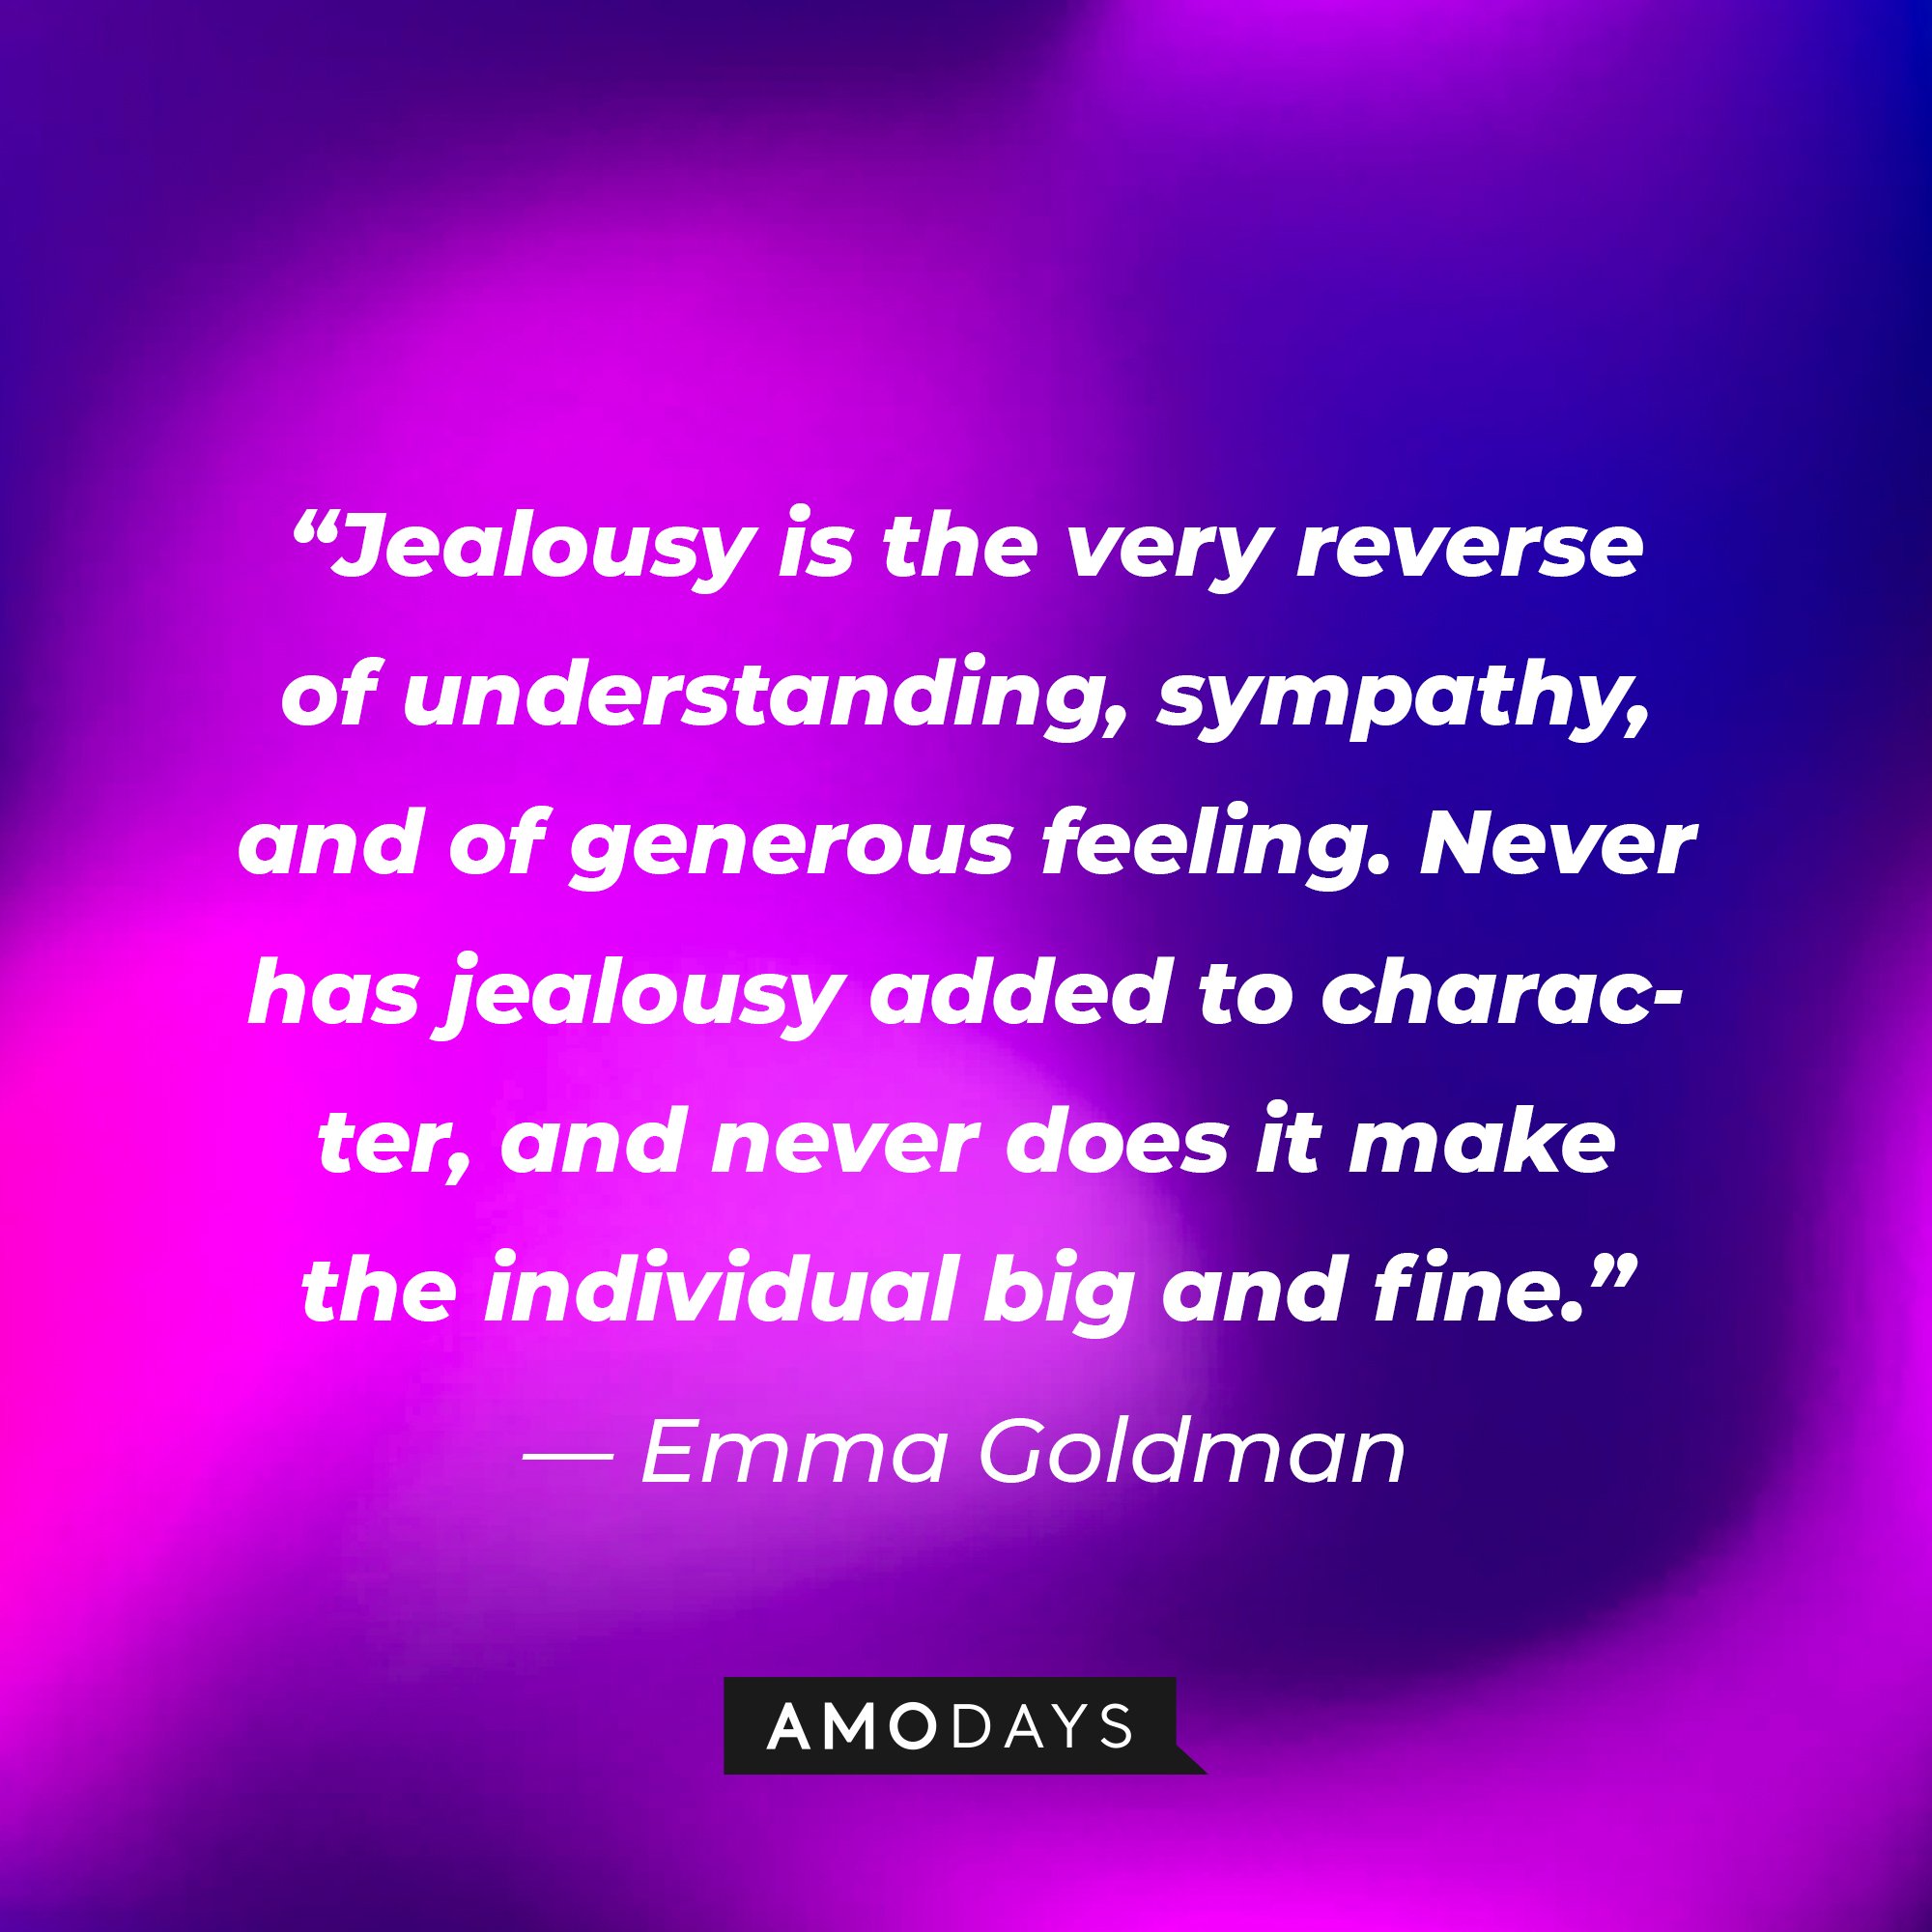 Emma Goldman's quote: “Jealousy is the very reverse of understanding, sympathy, and of generous feeling. Never has jealousy added to character, and never does it make the individual big and fine.” | Image: AmoDays